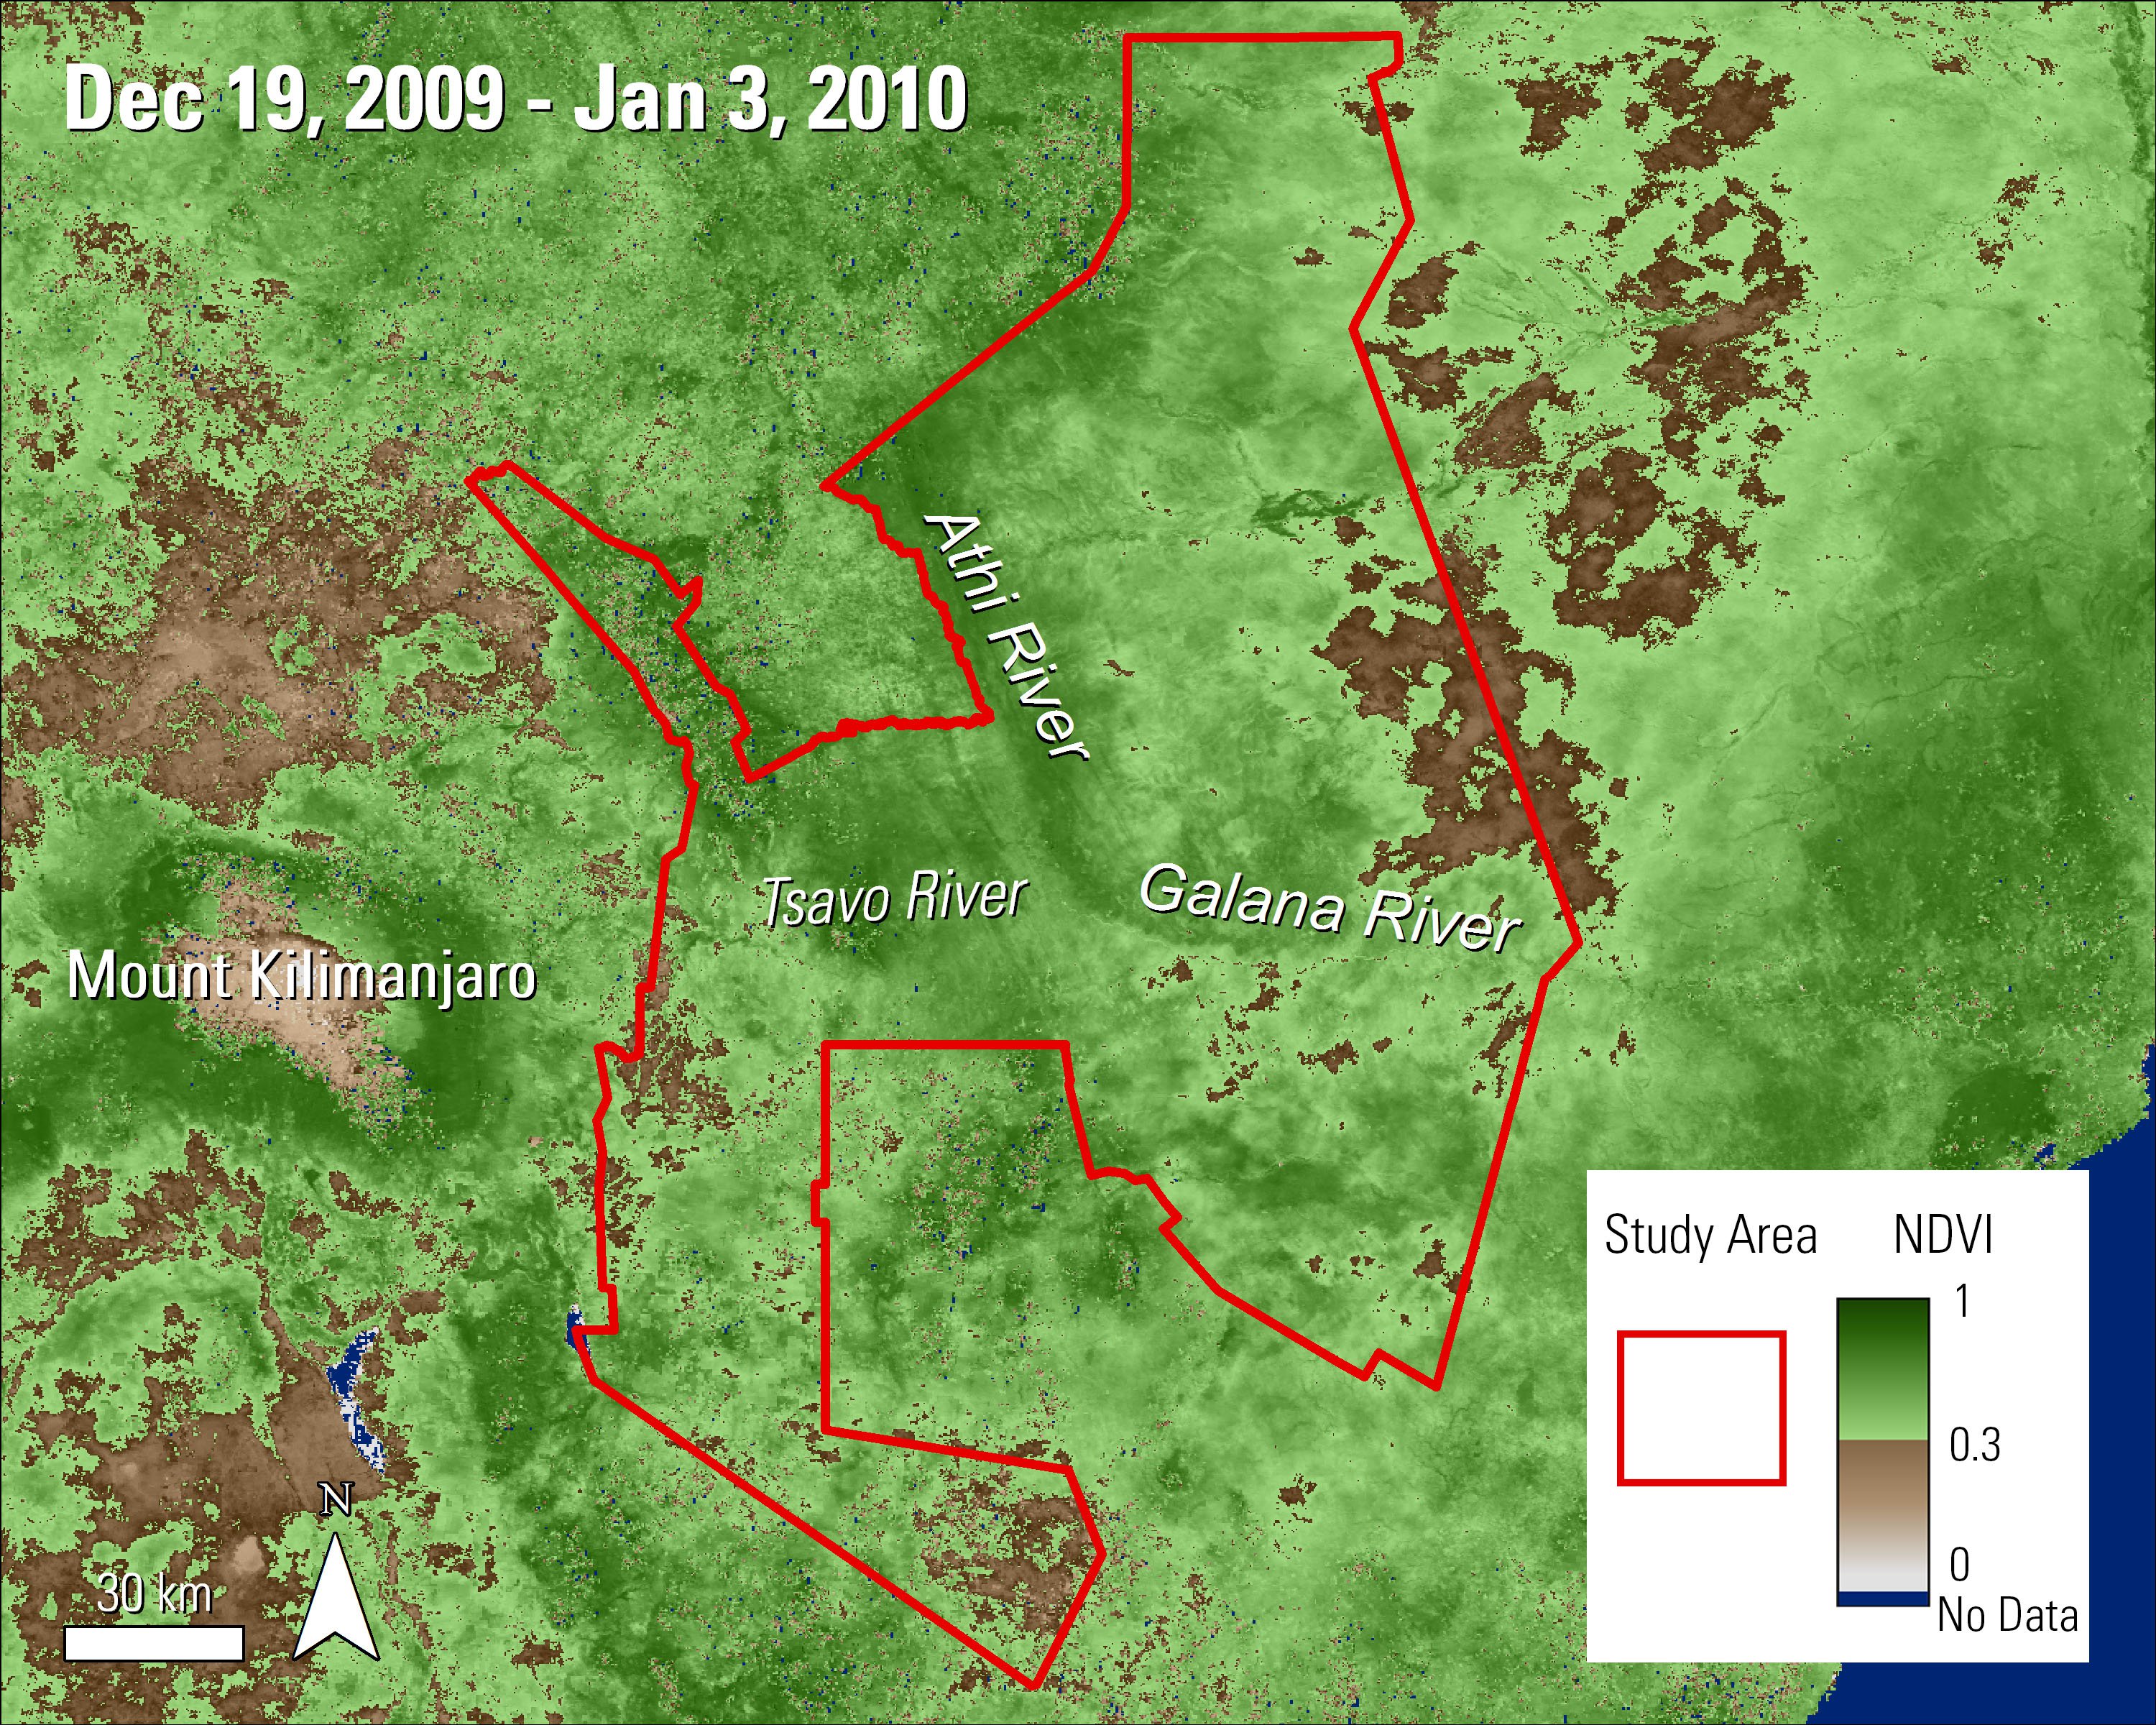 Terra MODIS NDVI data over the Tsavo Conservation Area in Kenya during December and January 2009.